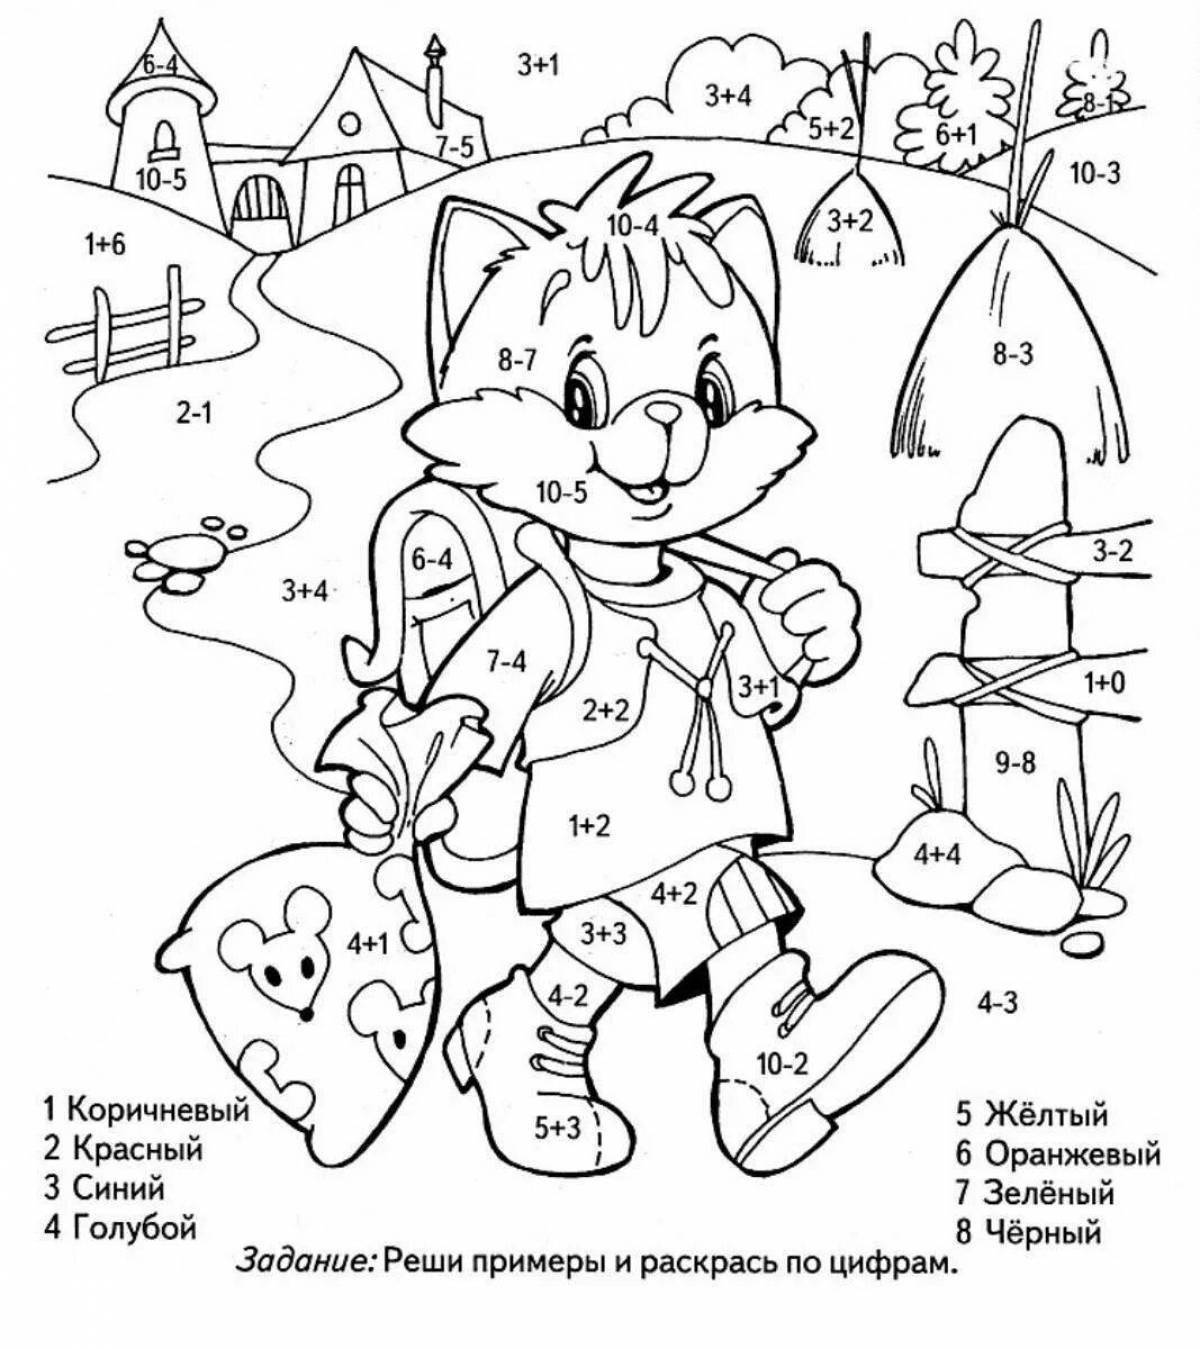 Stimulating math coloring book for 3-4 year olds